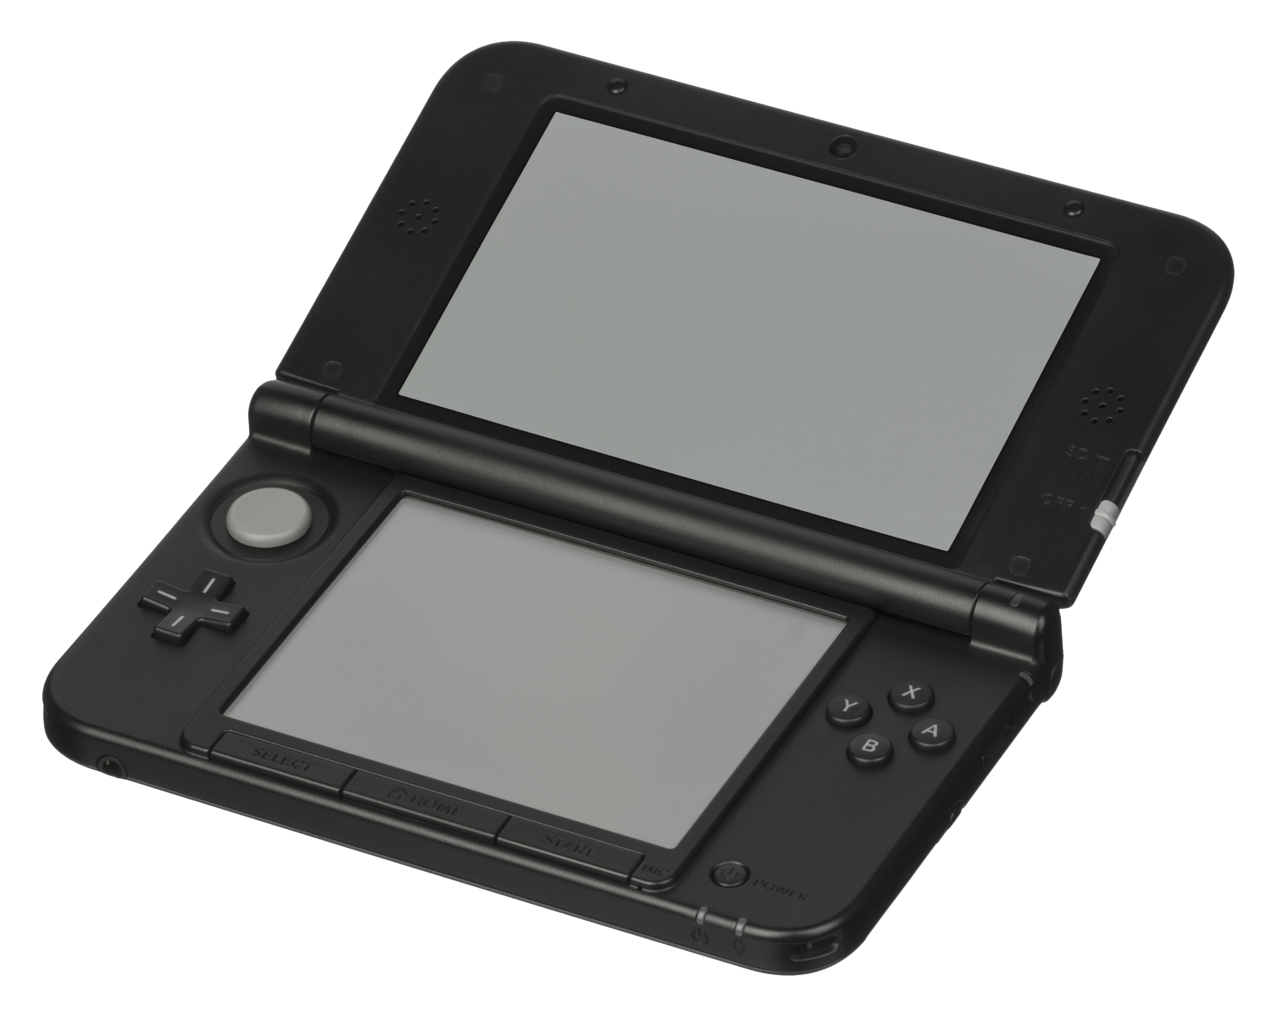 1280px-Nintendo-3DS-XL-angled